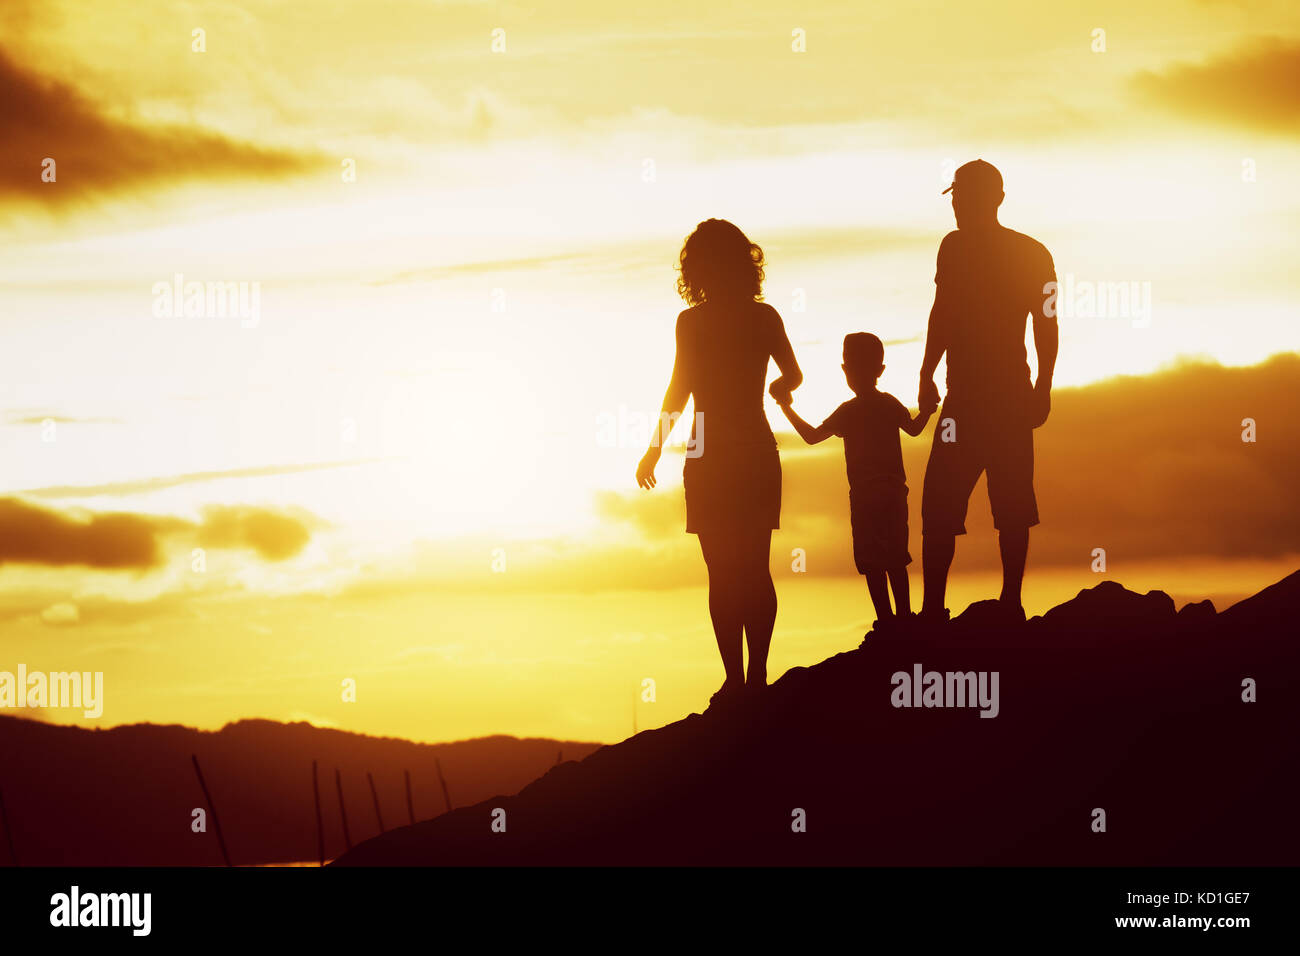 Family son sunset silhouettes sky Stock Photo